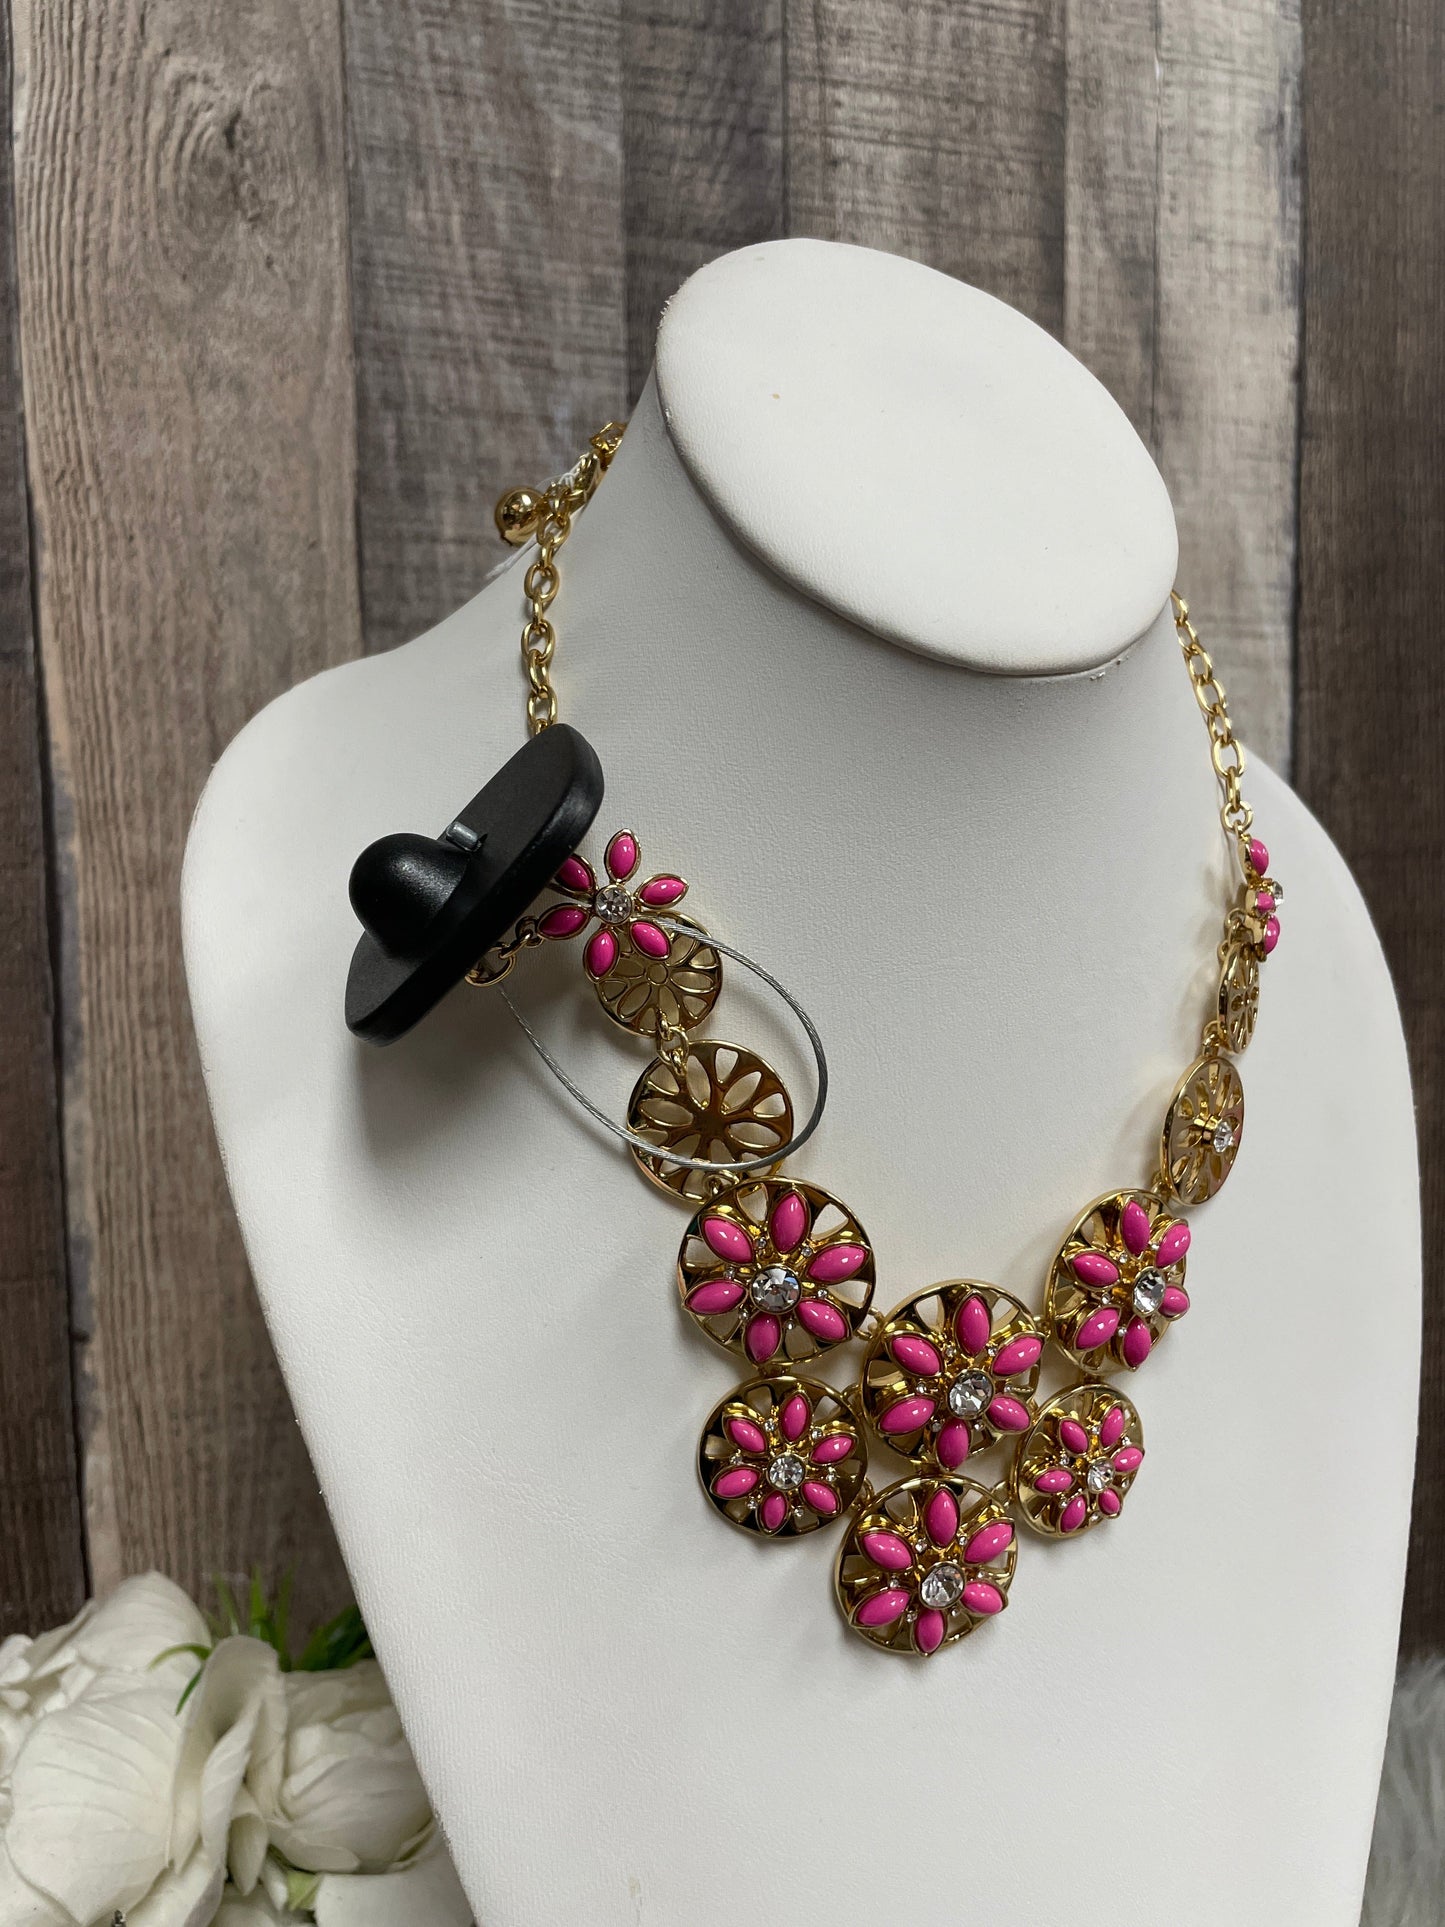 Necklace Statement By Kate Spade